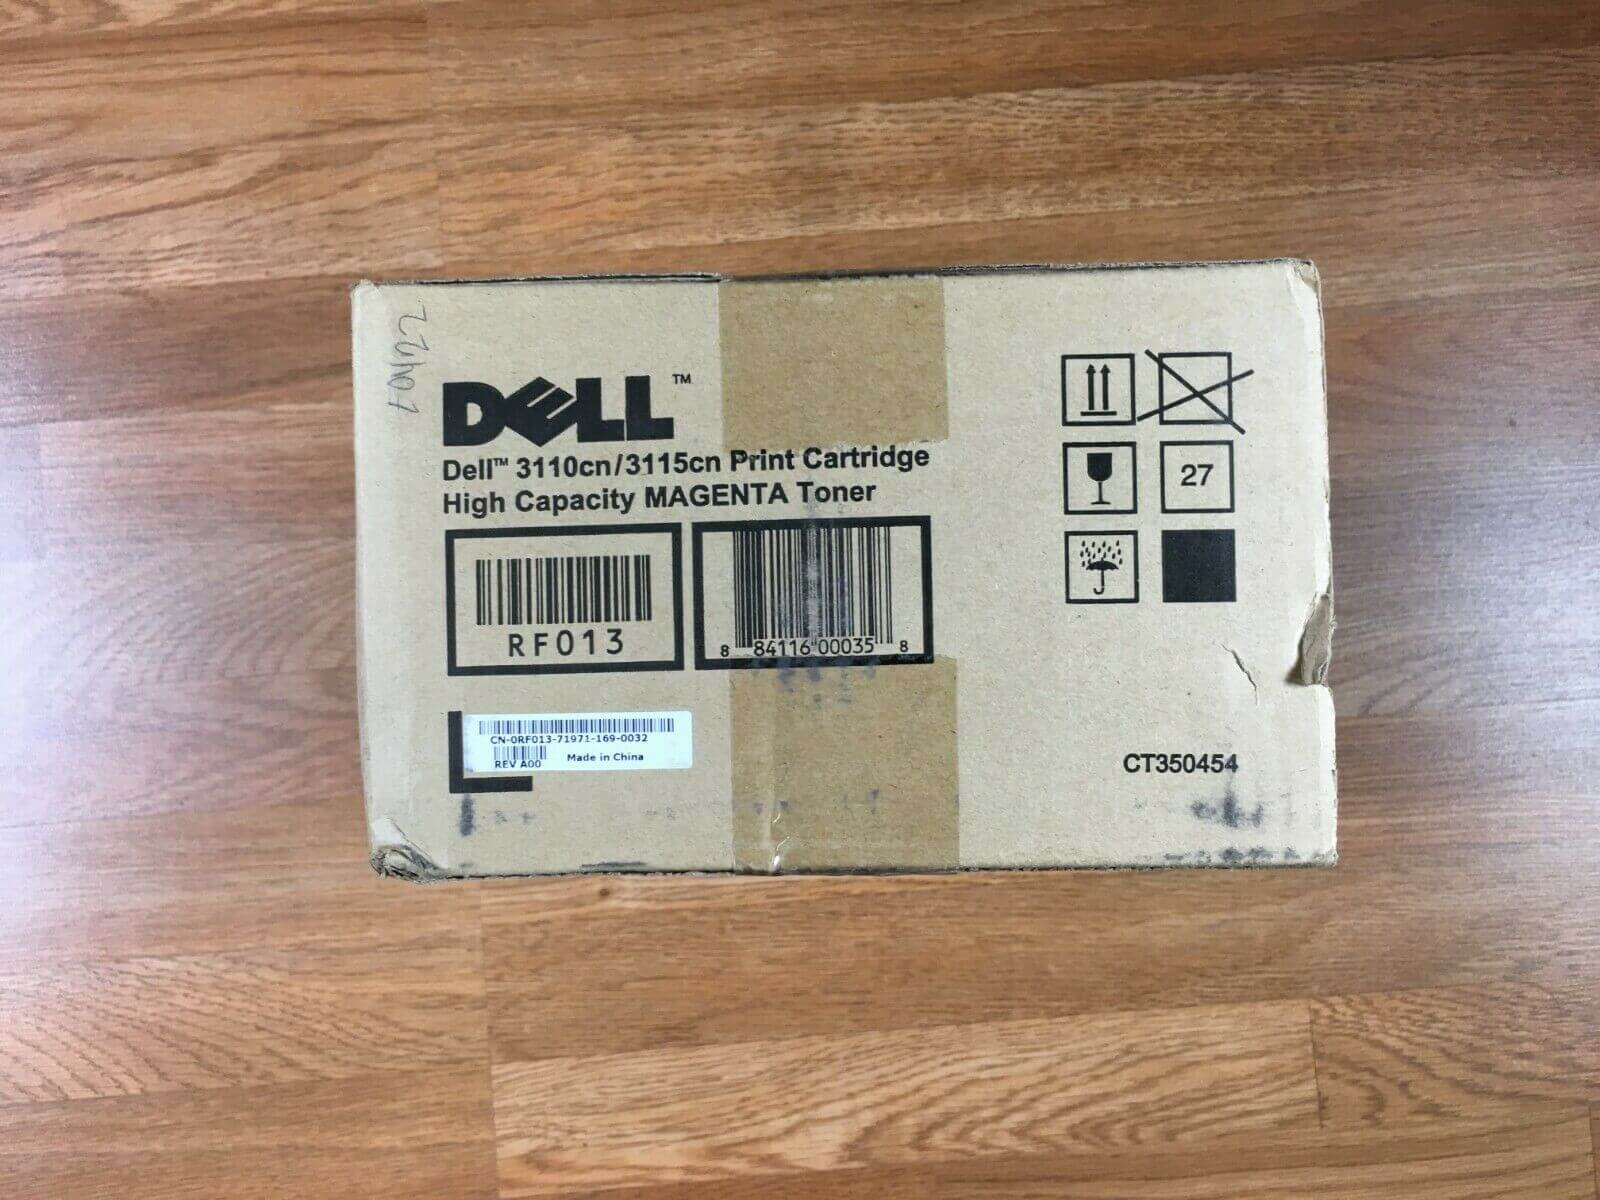 Genuine Dell Magenta High Capacity Toner For 3110cn And 3115cn FedEx 2Day Air!! - copier-clearance-center